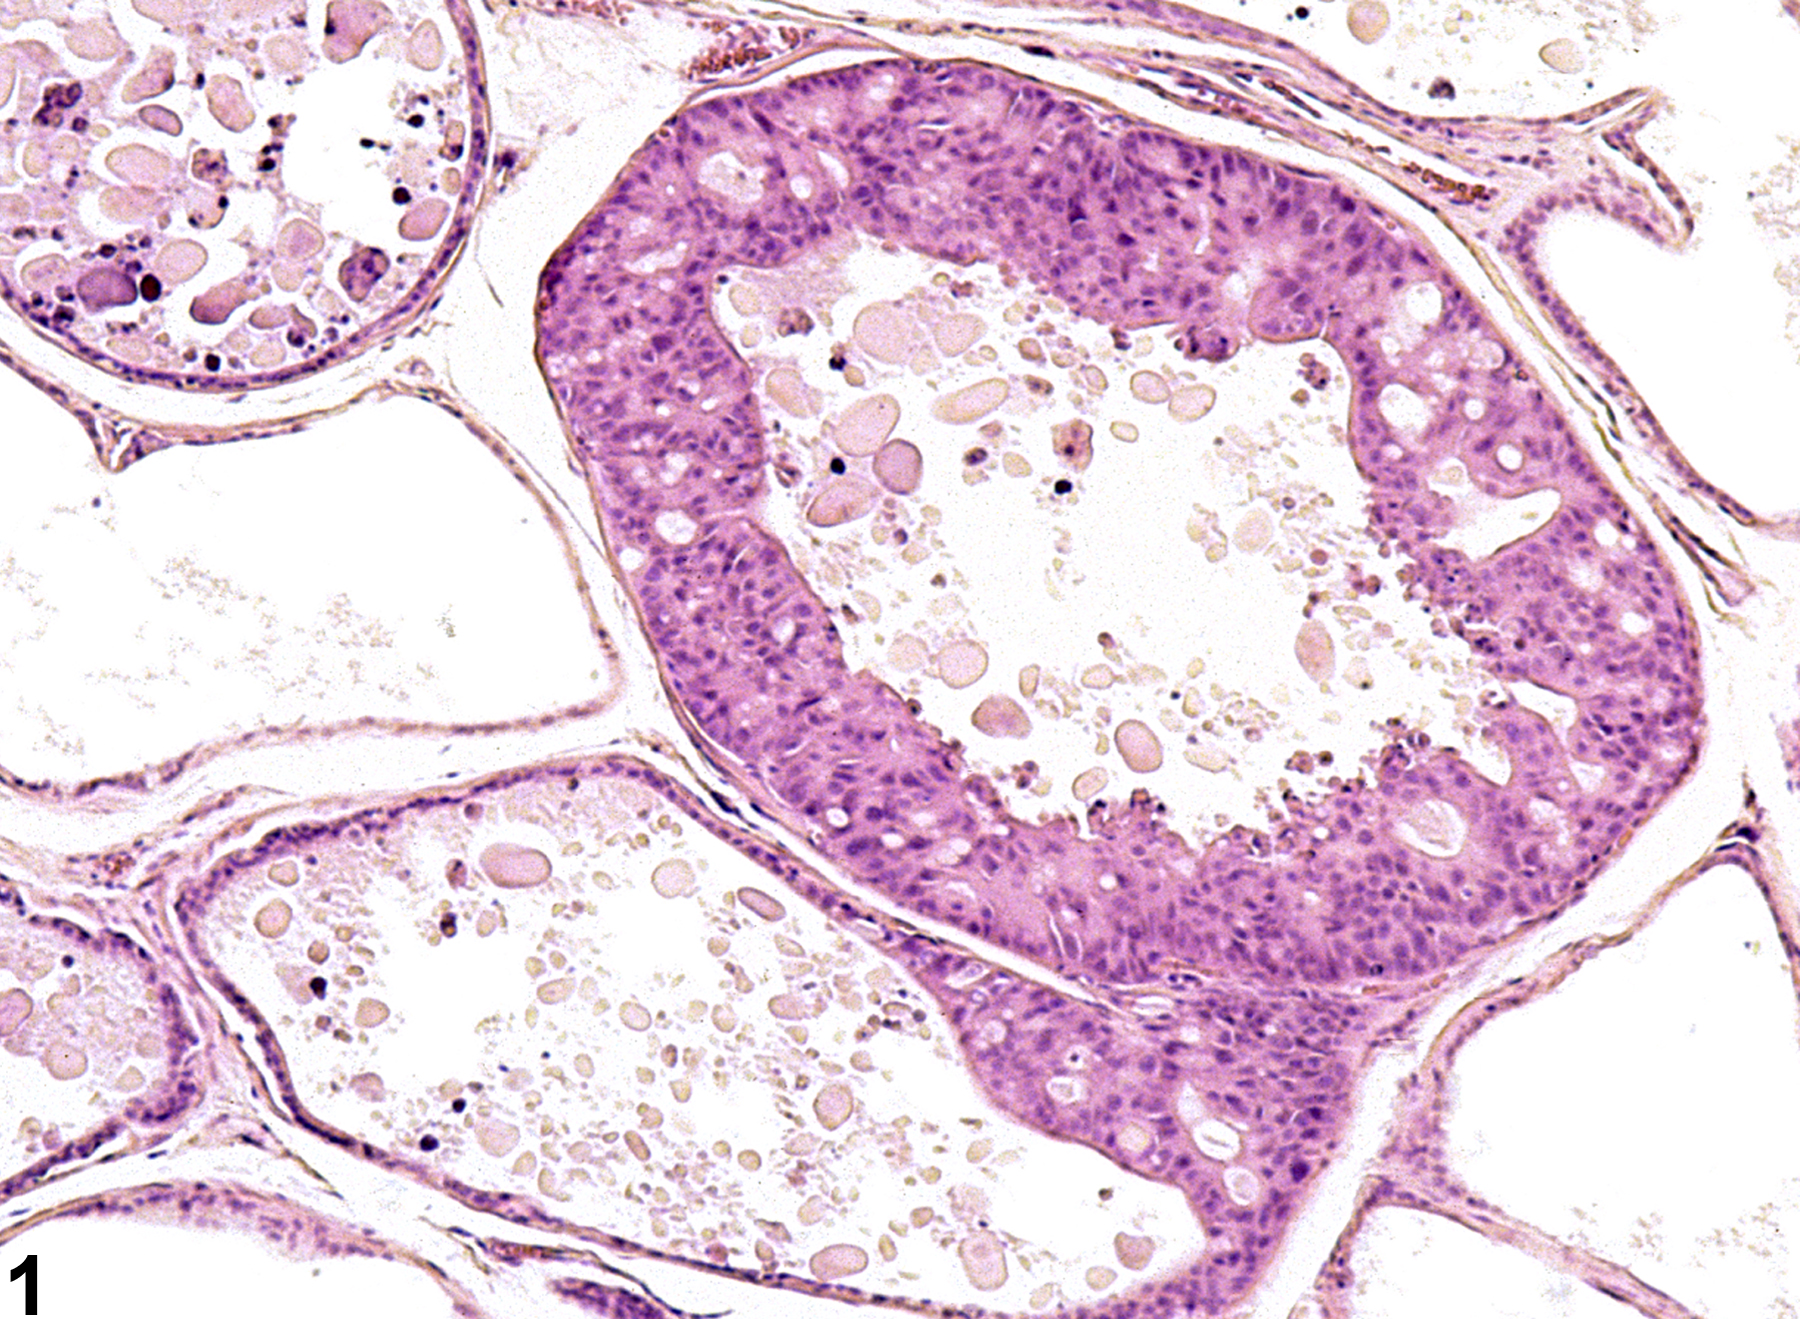 Image of epithelial hyperplasia in the prostate from a male F344/N rat in a chronic study